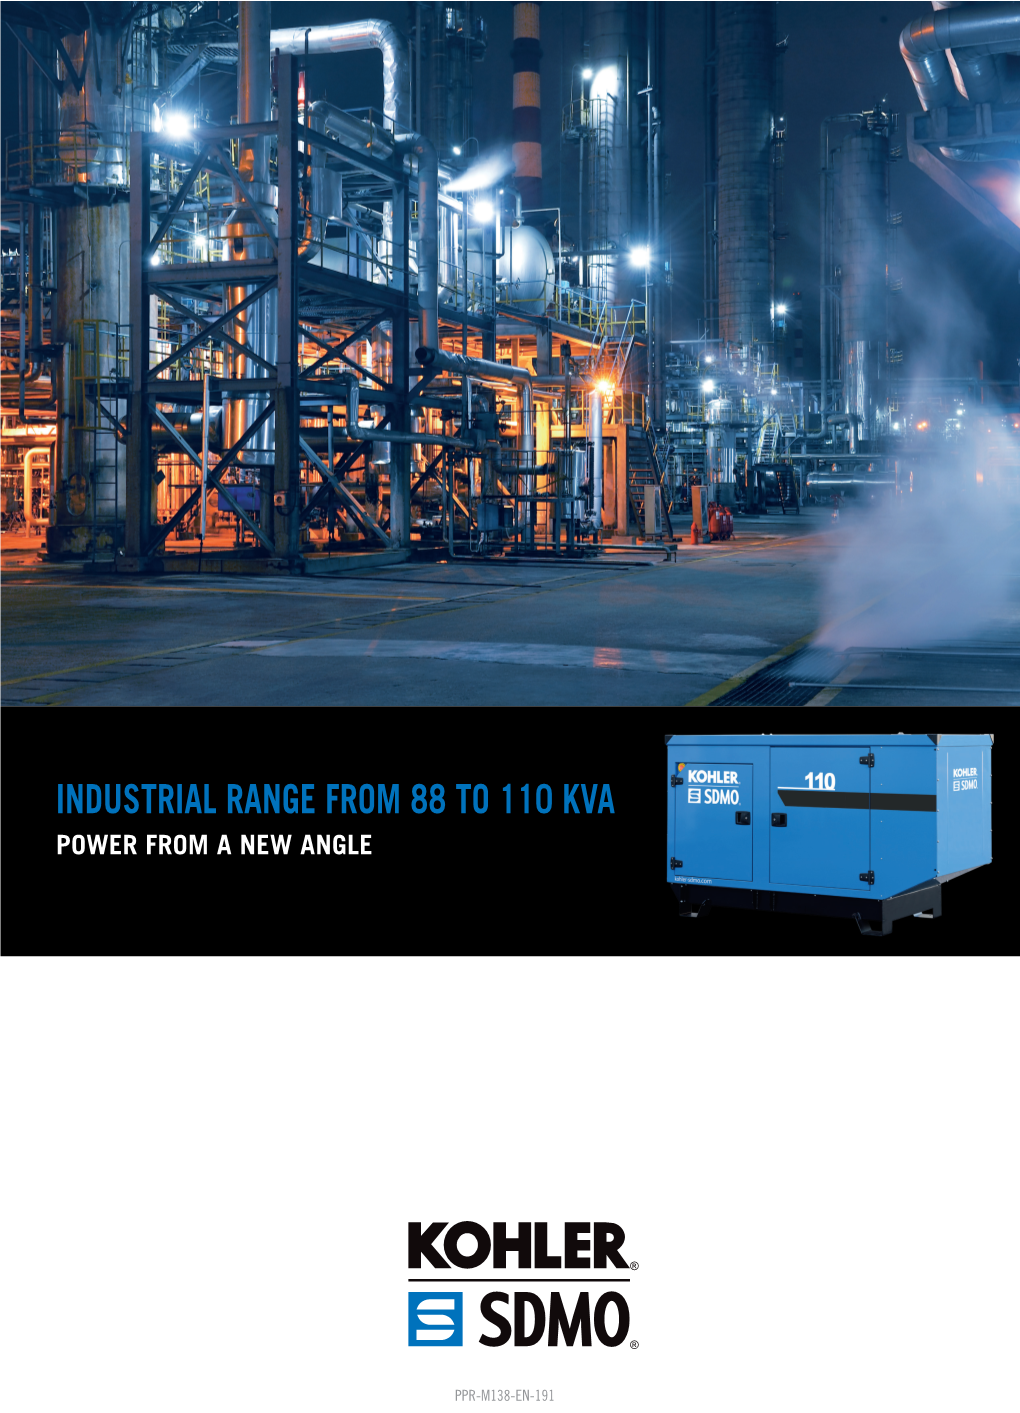 Industrial Range from 88 to 110 Kva Power from a New Angle